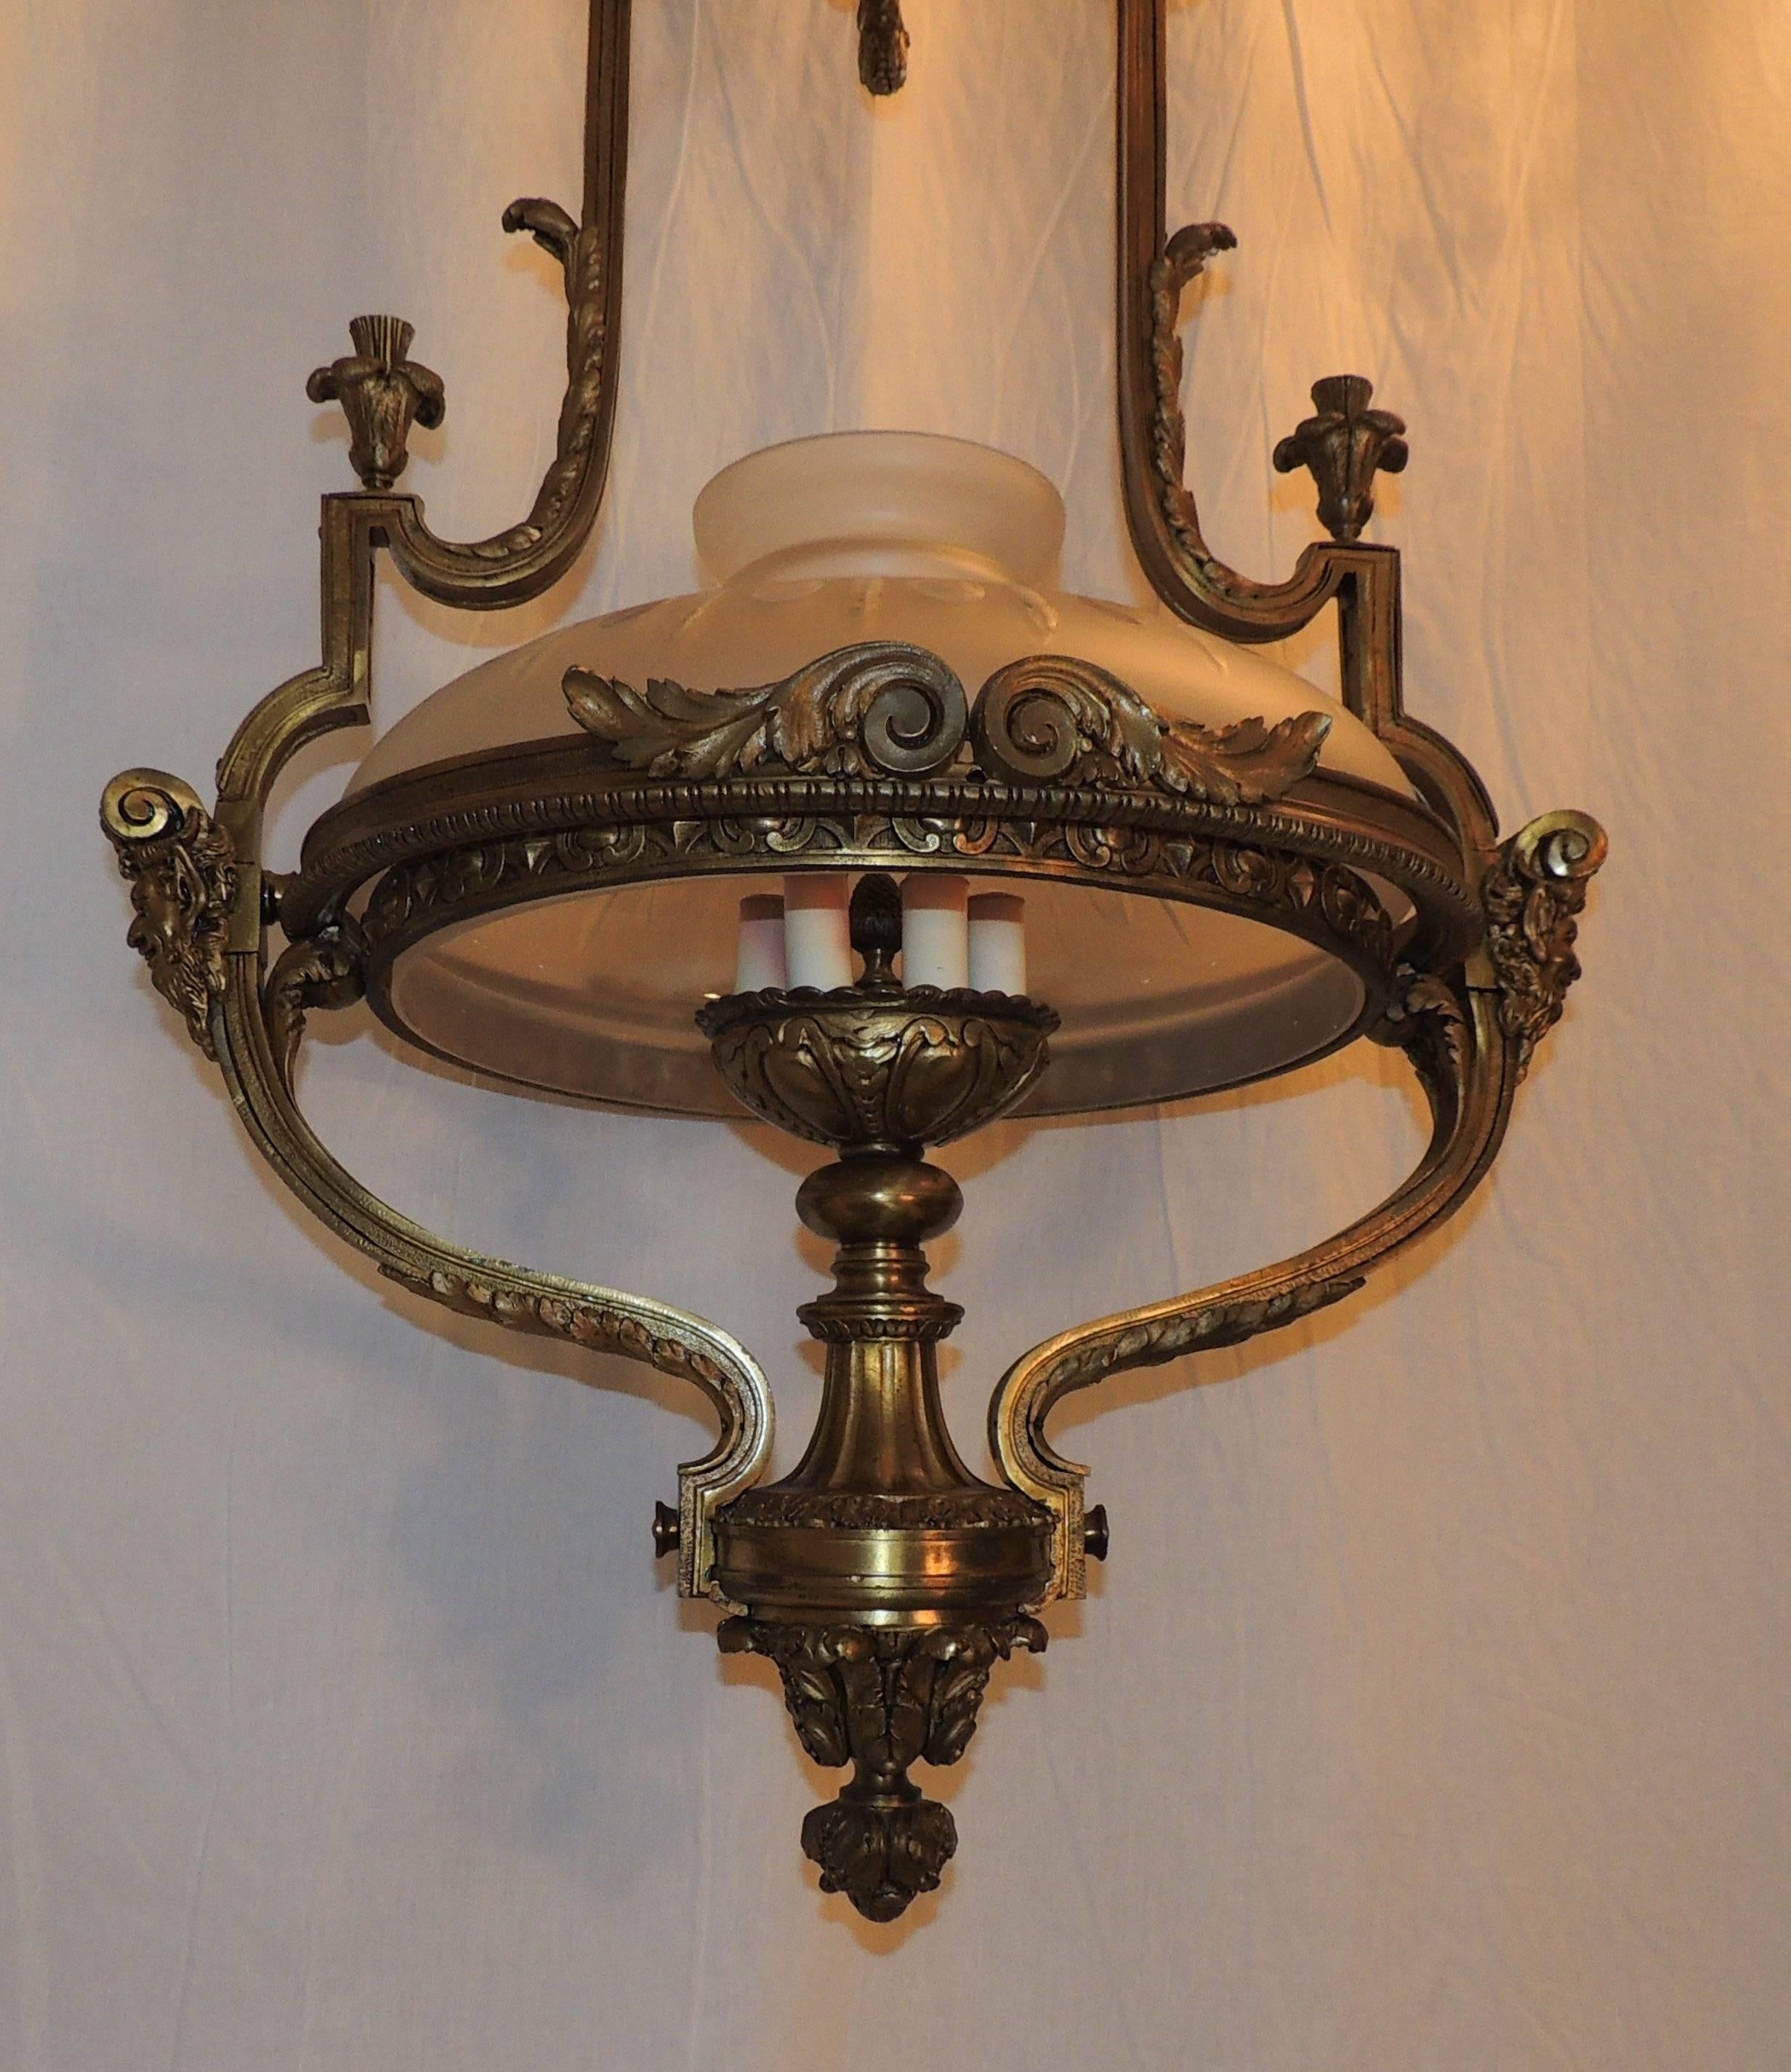 Monumental French Victorian Gilt Bronze Frosted Globe Chandelier Fixture Lantern For Sale 2